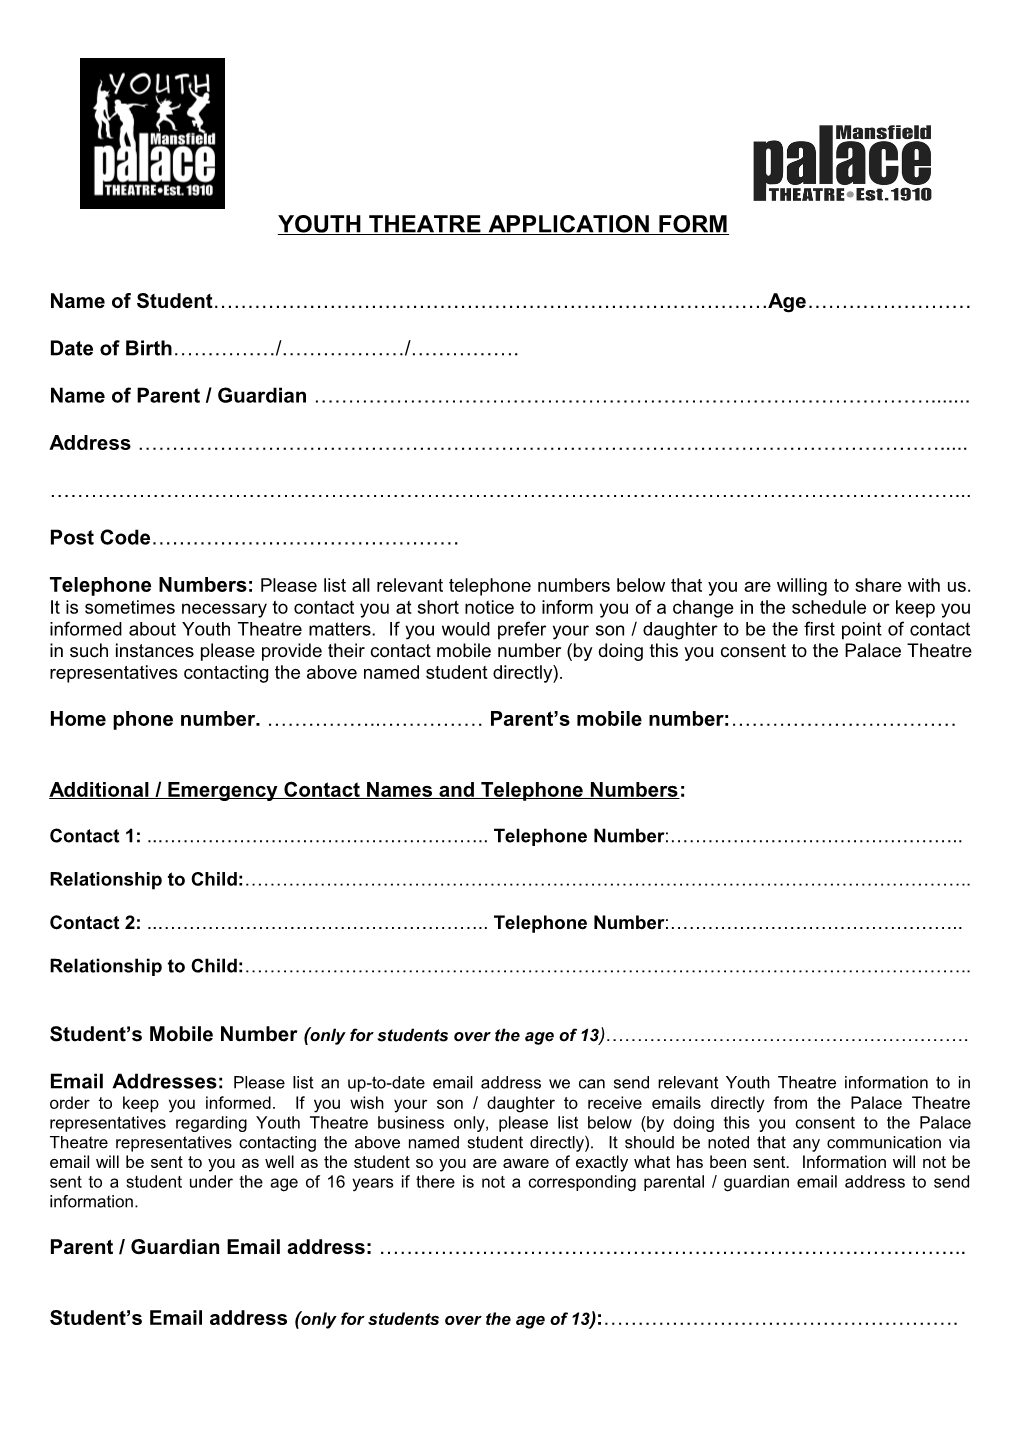 Mansfield Palace Theatre Stage Skills Enrolment Form